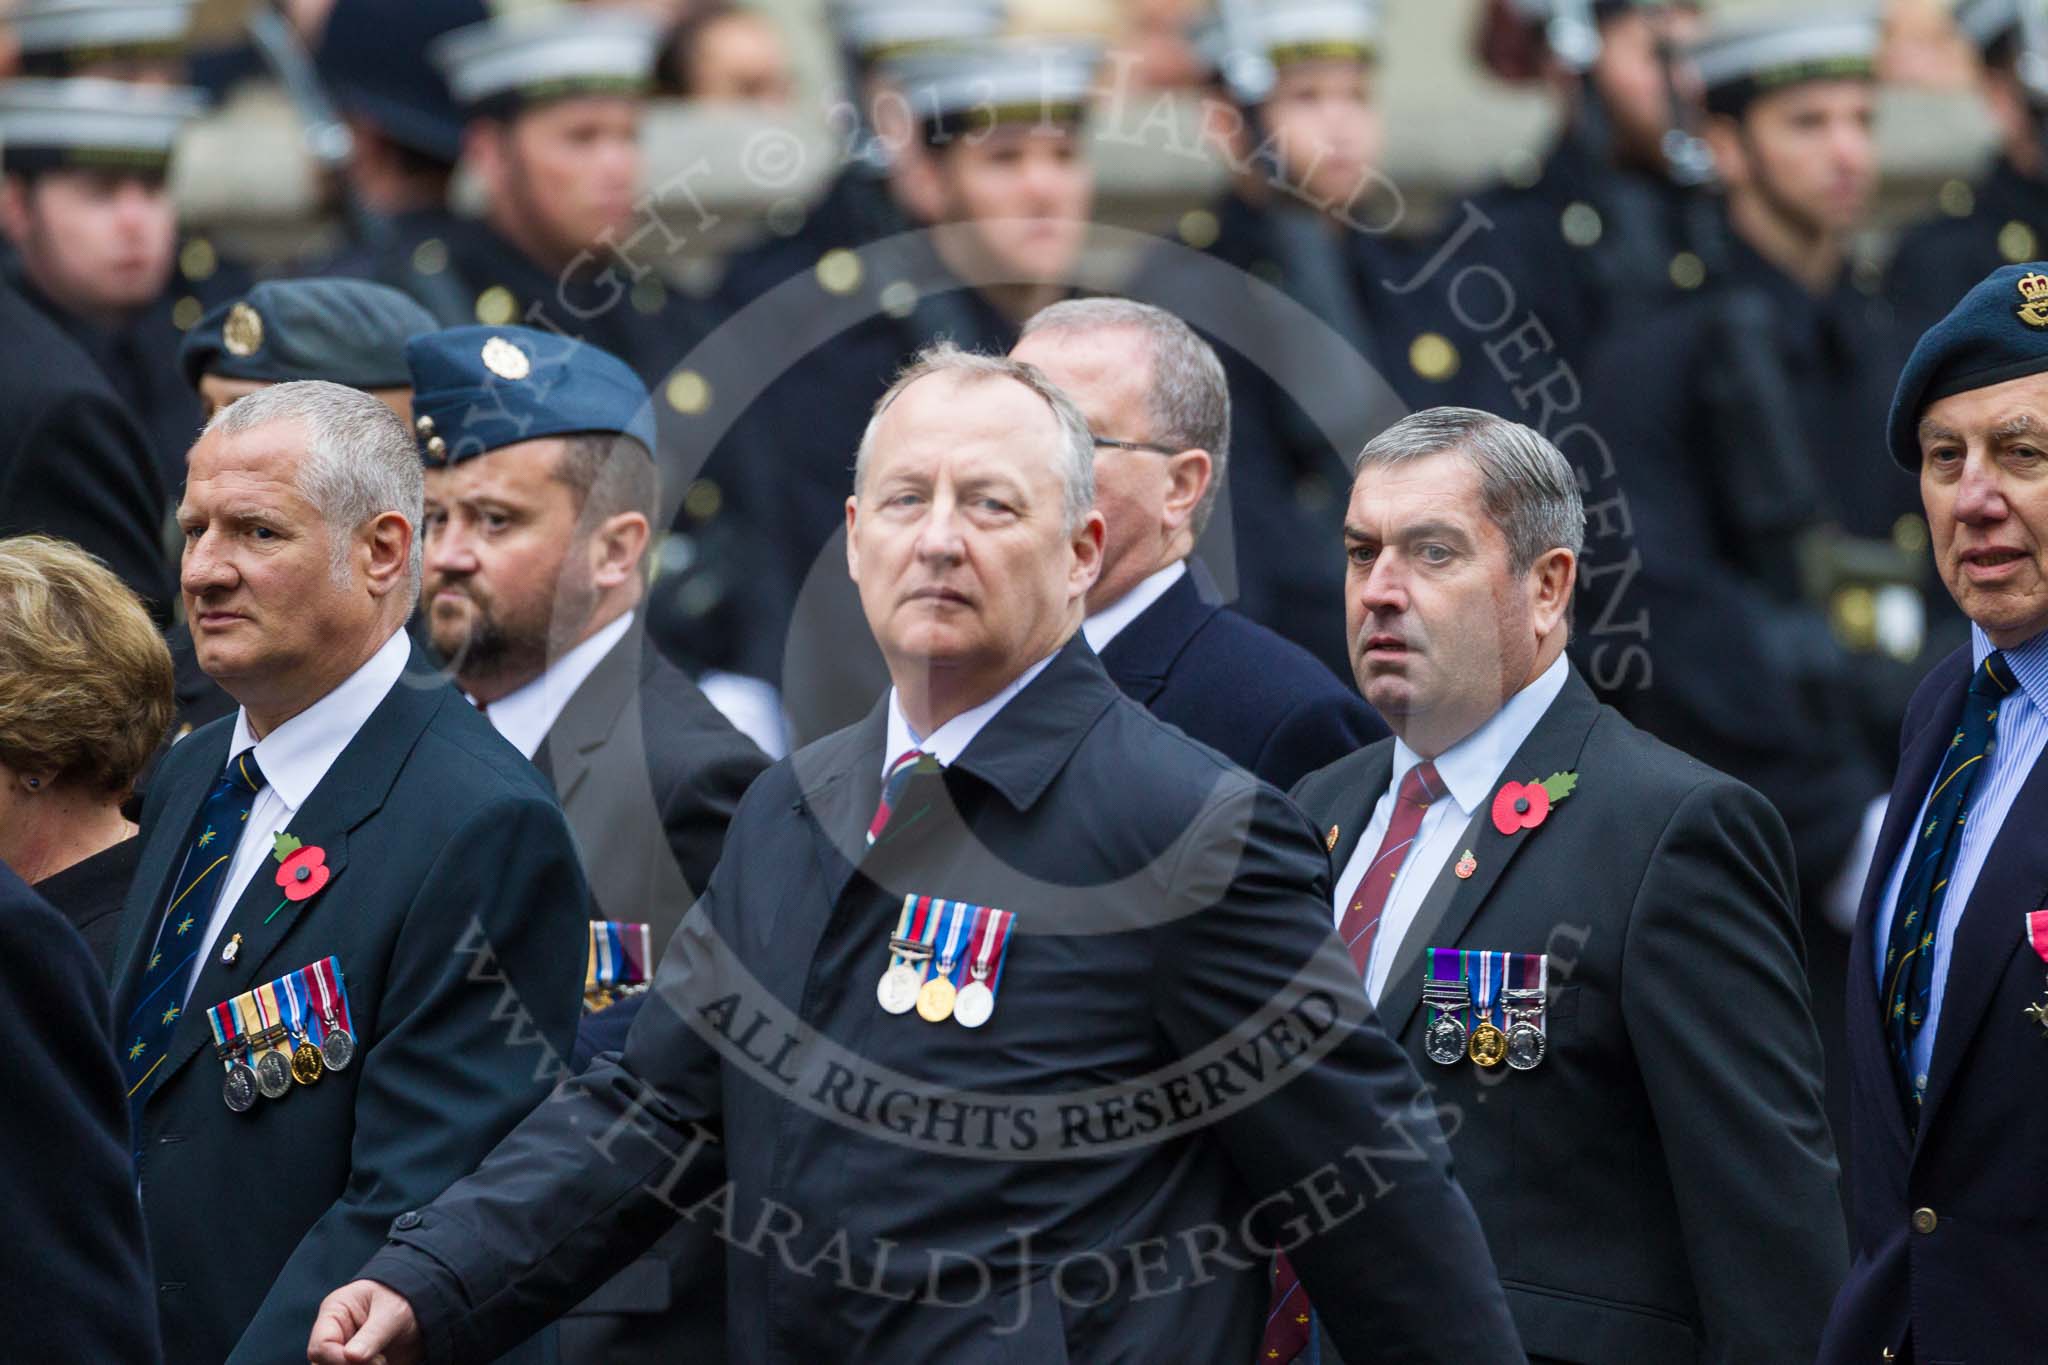 Remembrance Sunday at the Cenotaph 2015: Group C17, Royal Air Force Movements and Mobile Air Movements Squadron Association (RAF MAMS) (New for 2015).
Cenotaph, Whitehall, London SW1,
London,
Greater London,
United Kingdom,
on 08 November 2015 at 11:49, image #523